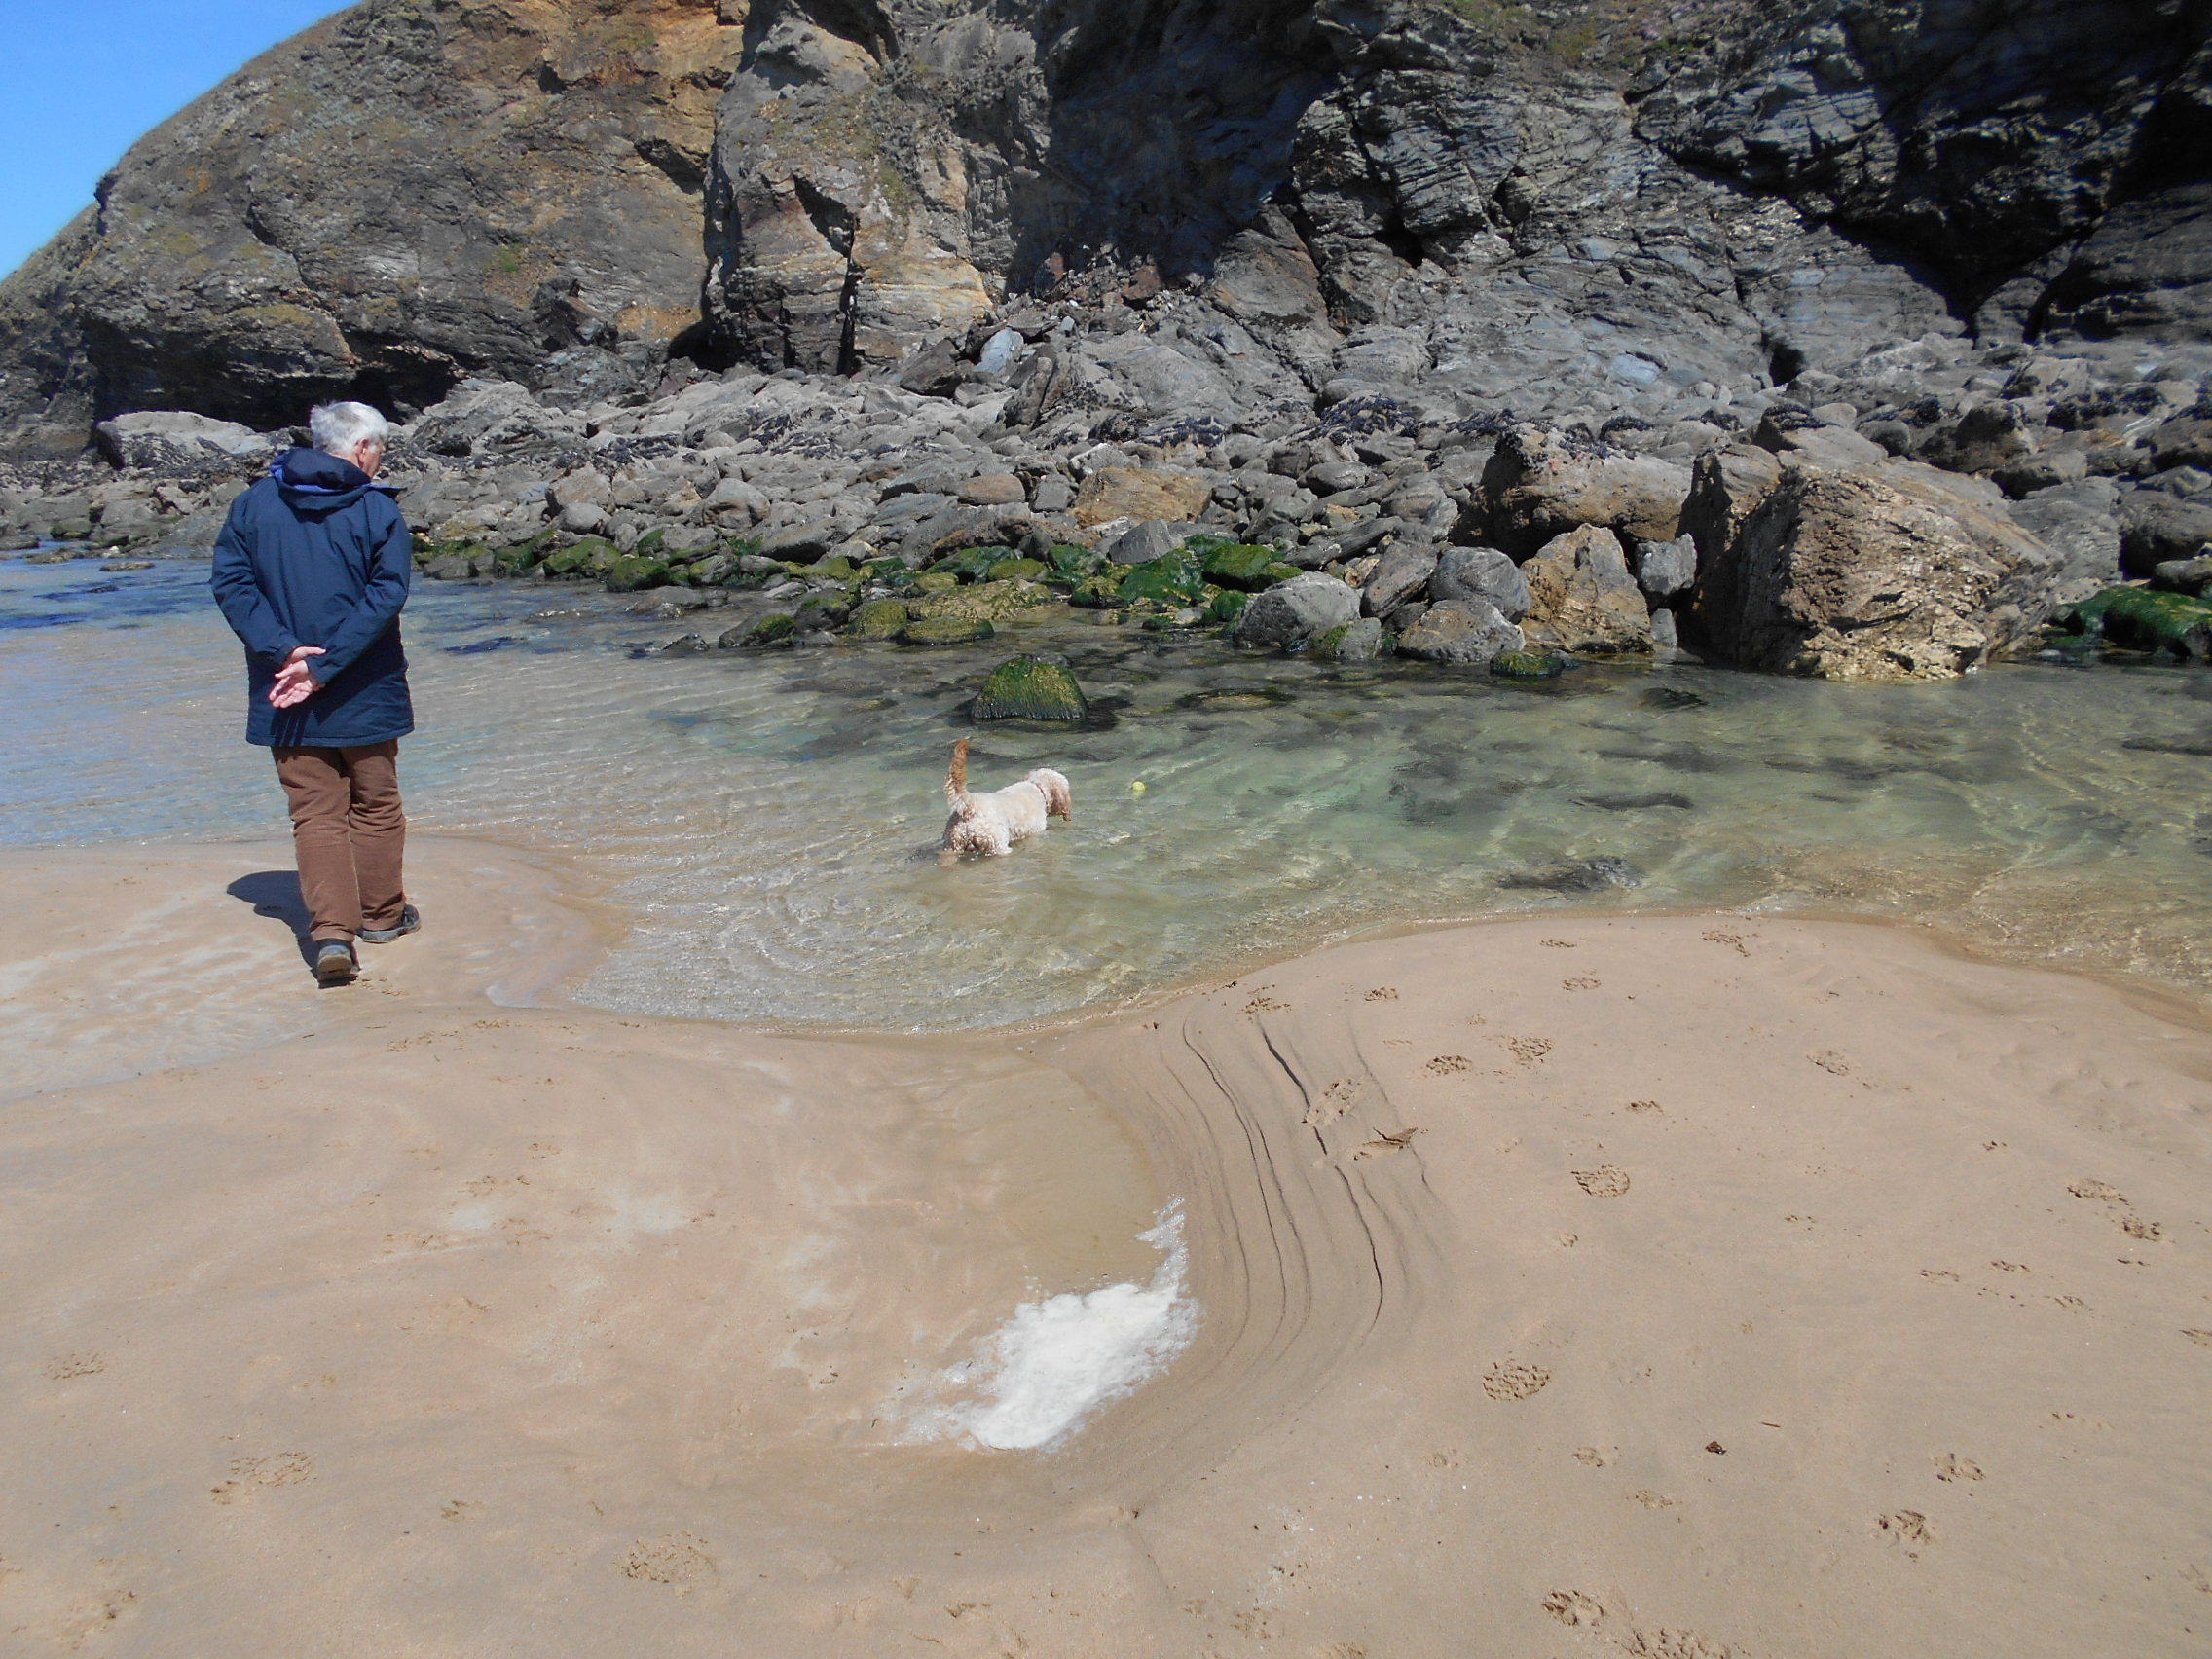 Clumberdoodle Archie in a rock pool on Mawgan Porth